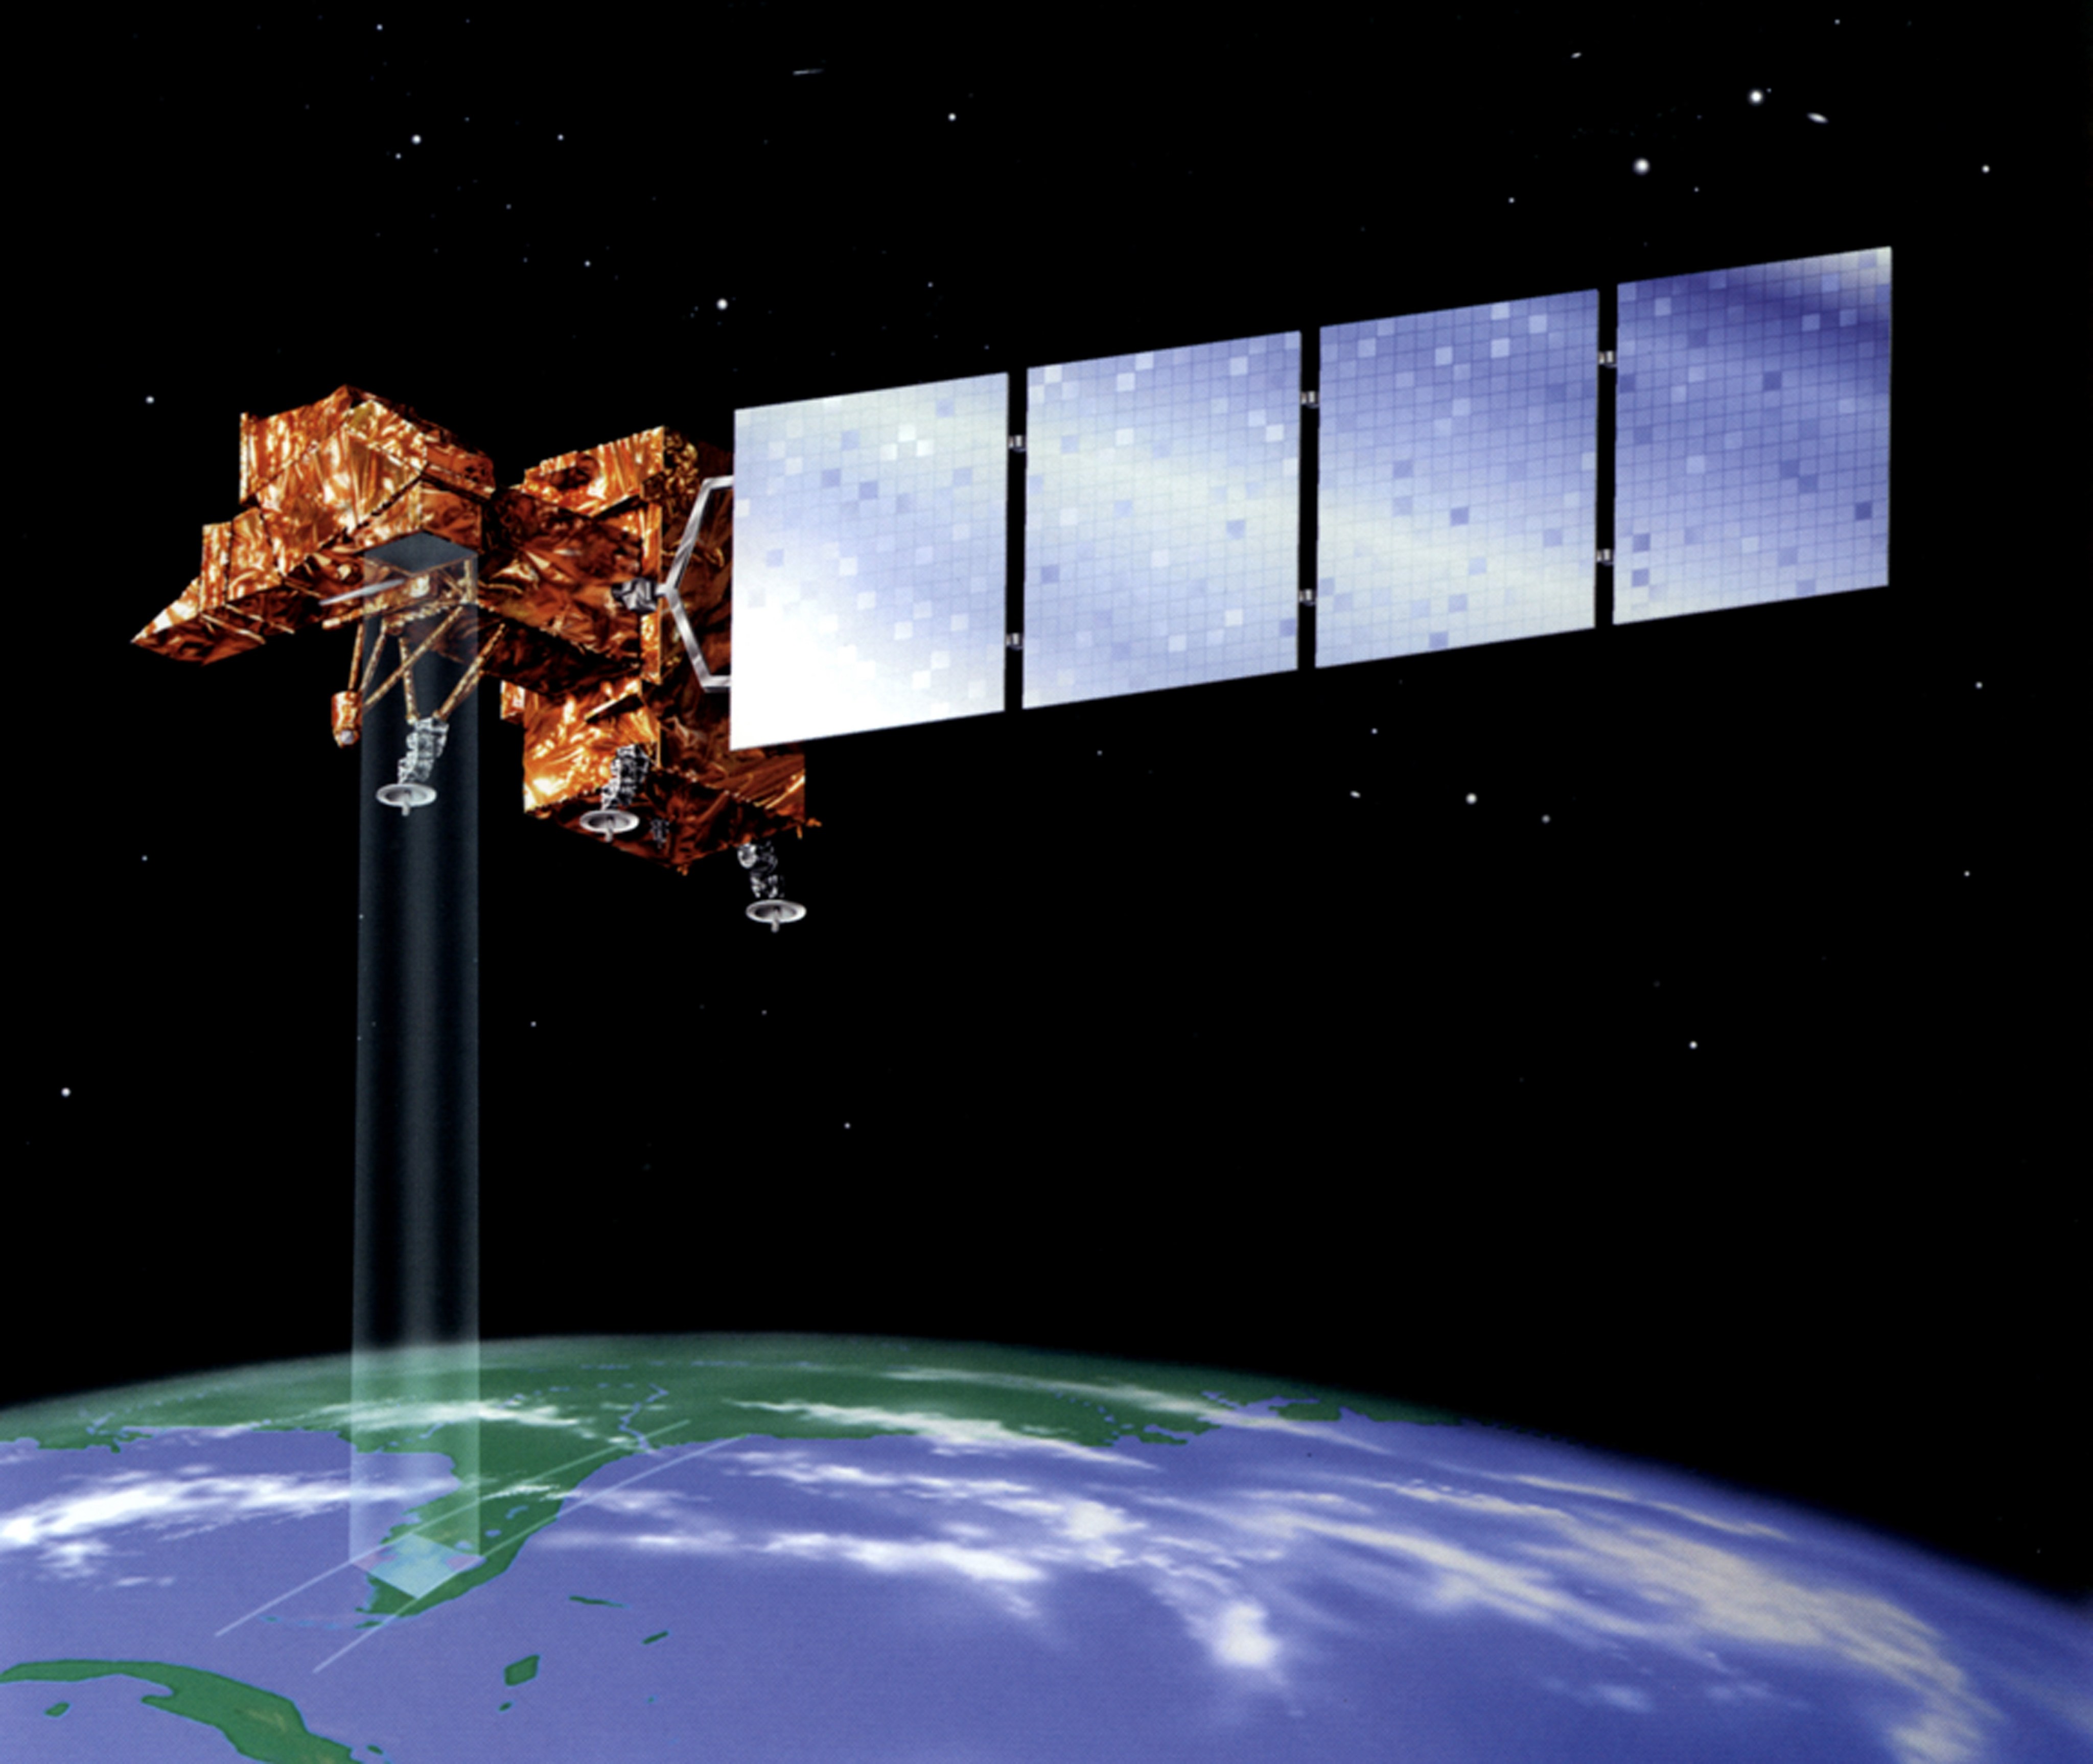 Illustration of the Landsat 7satellite with its solar wing extended as it scans Earth below.